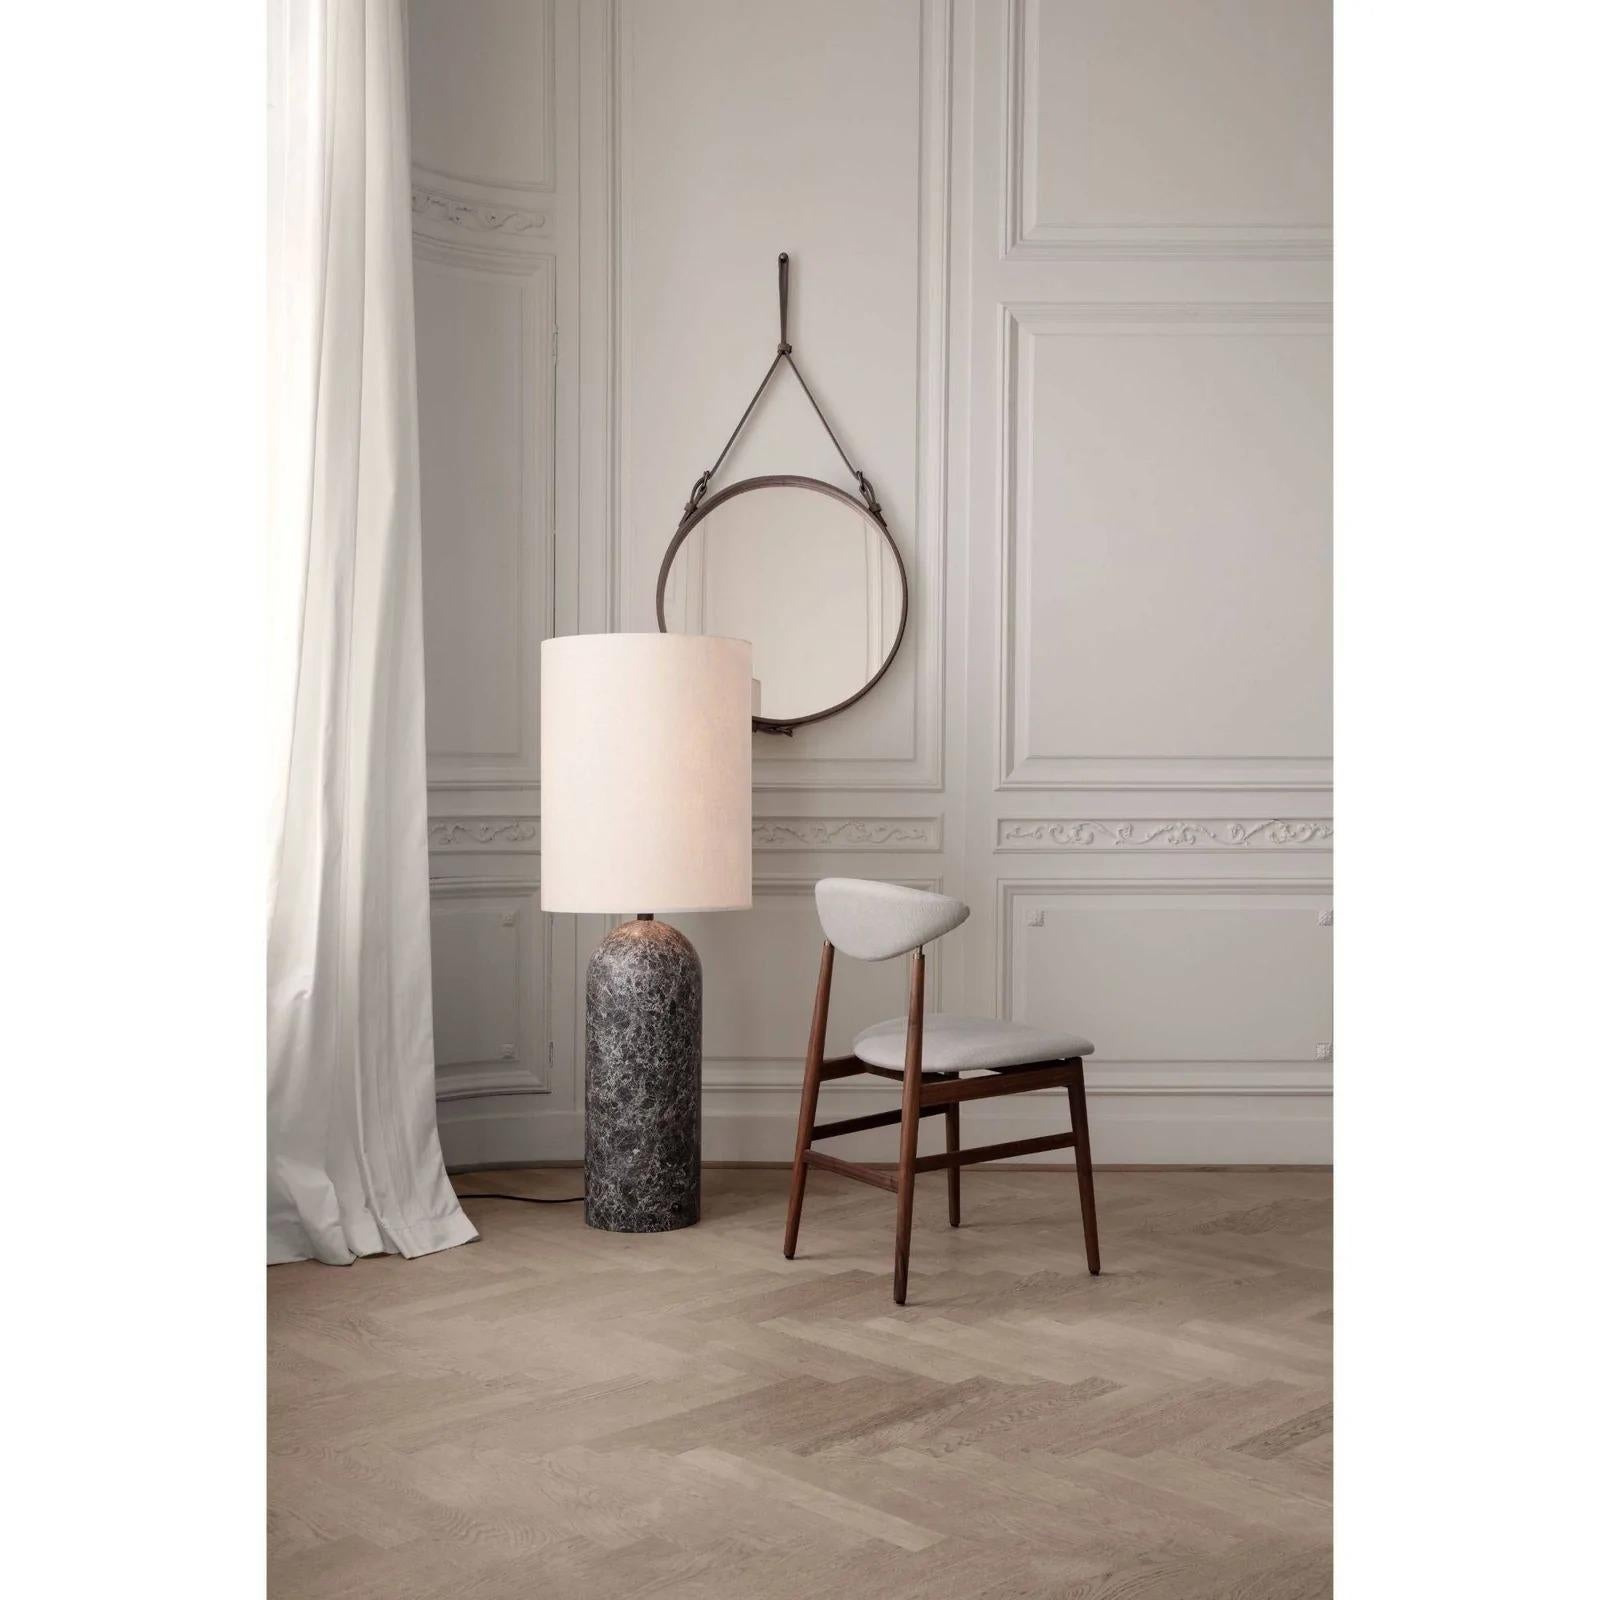 Gravity Floor Lamp - XL High, White Marble, Canvas In New Condition For Sale In Berkeley, CA